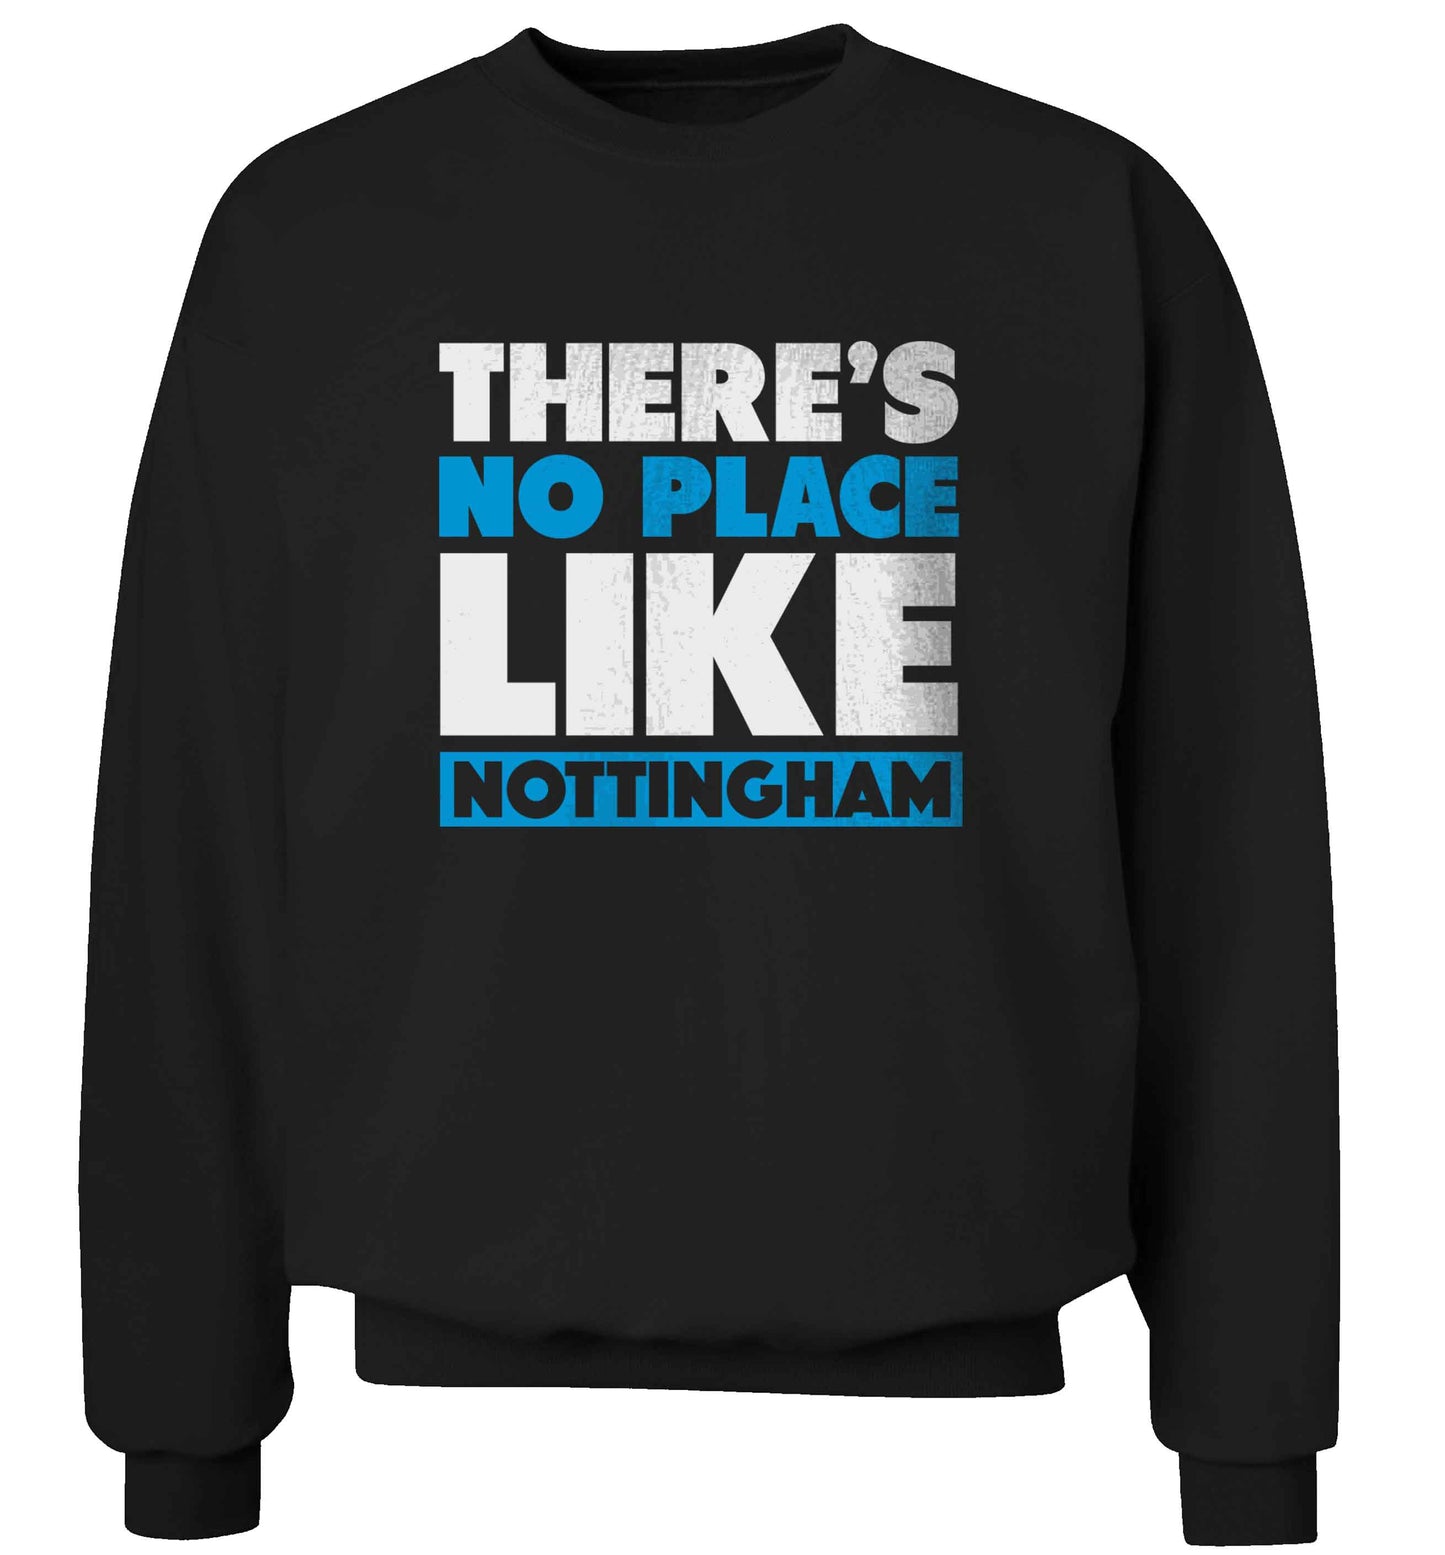 There's no place like Nottingham adult's unisex black sweater 2XL